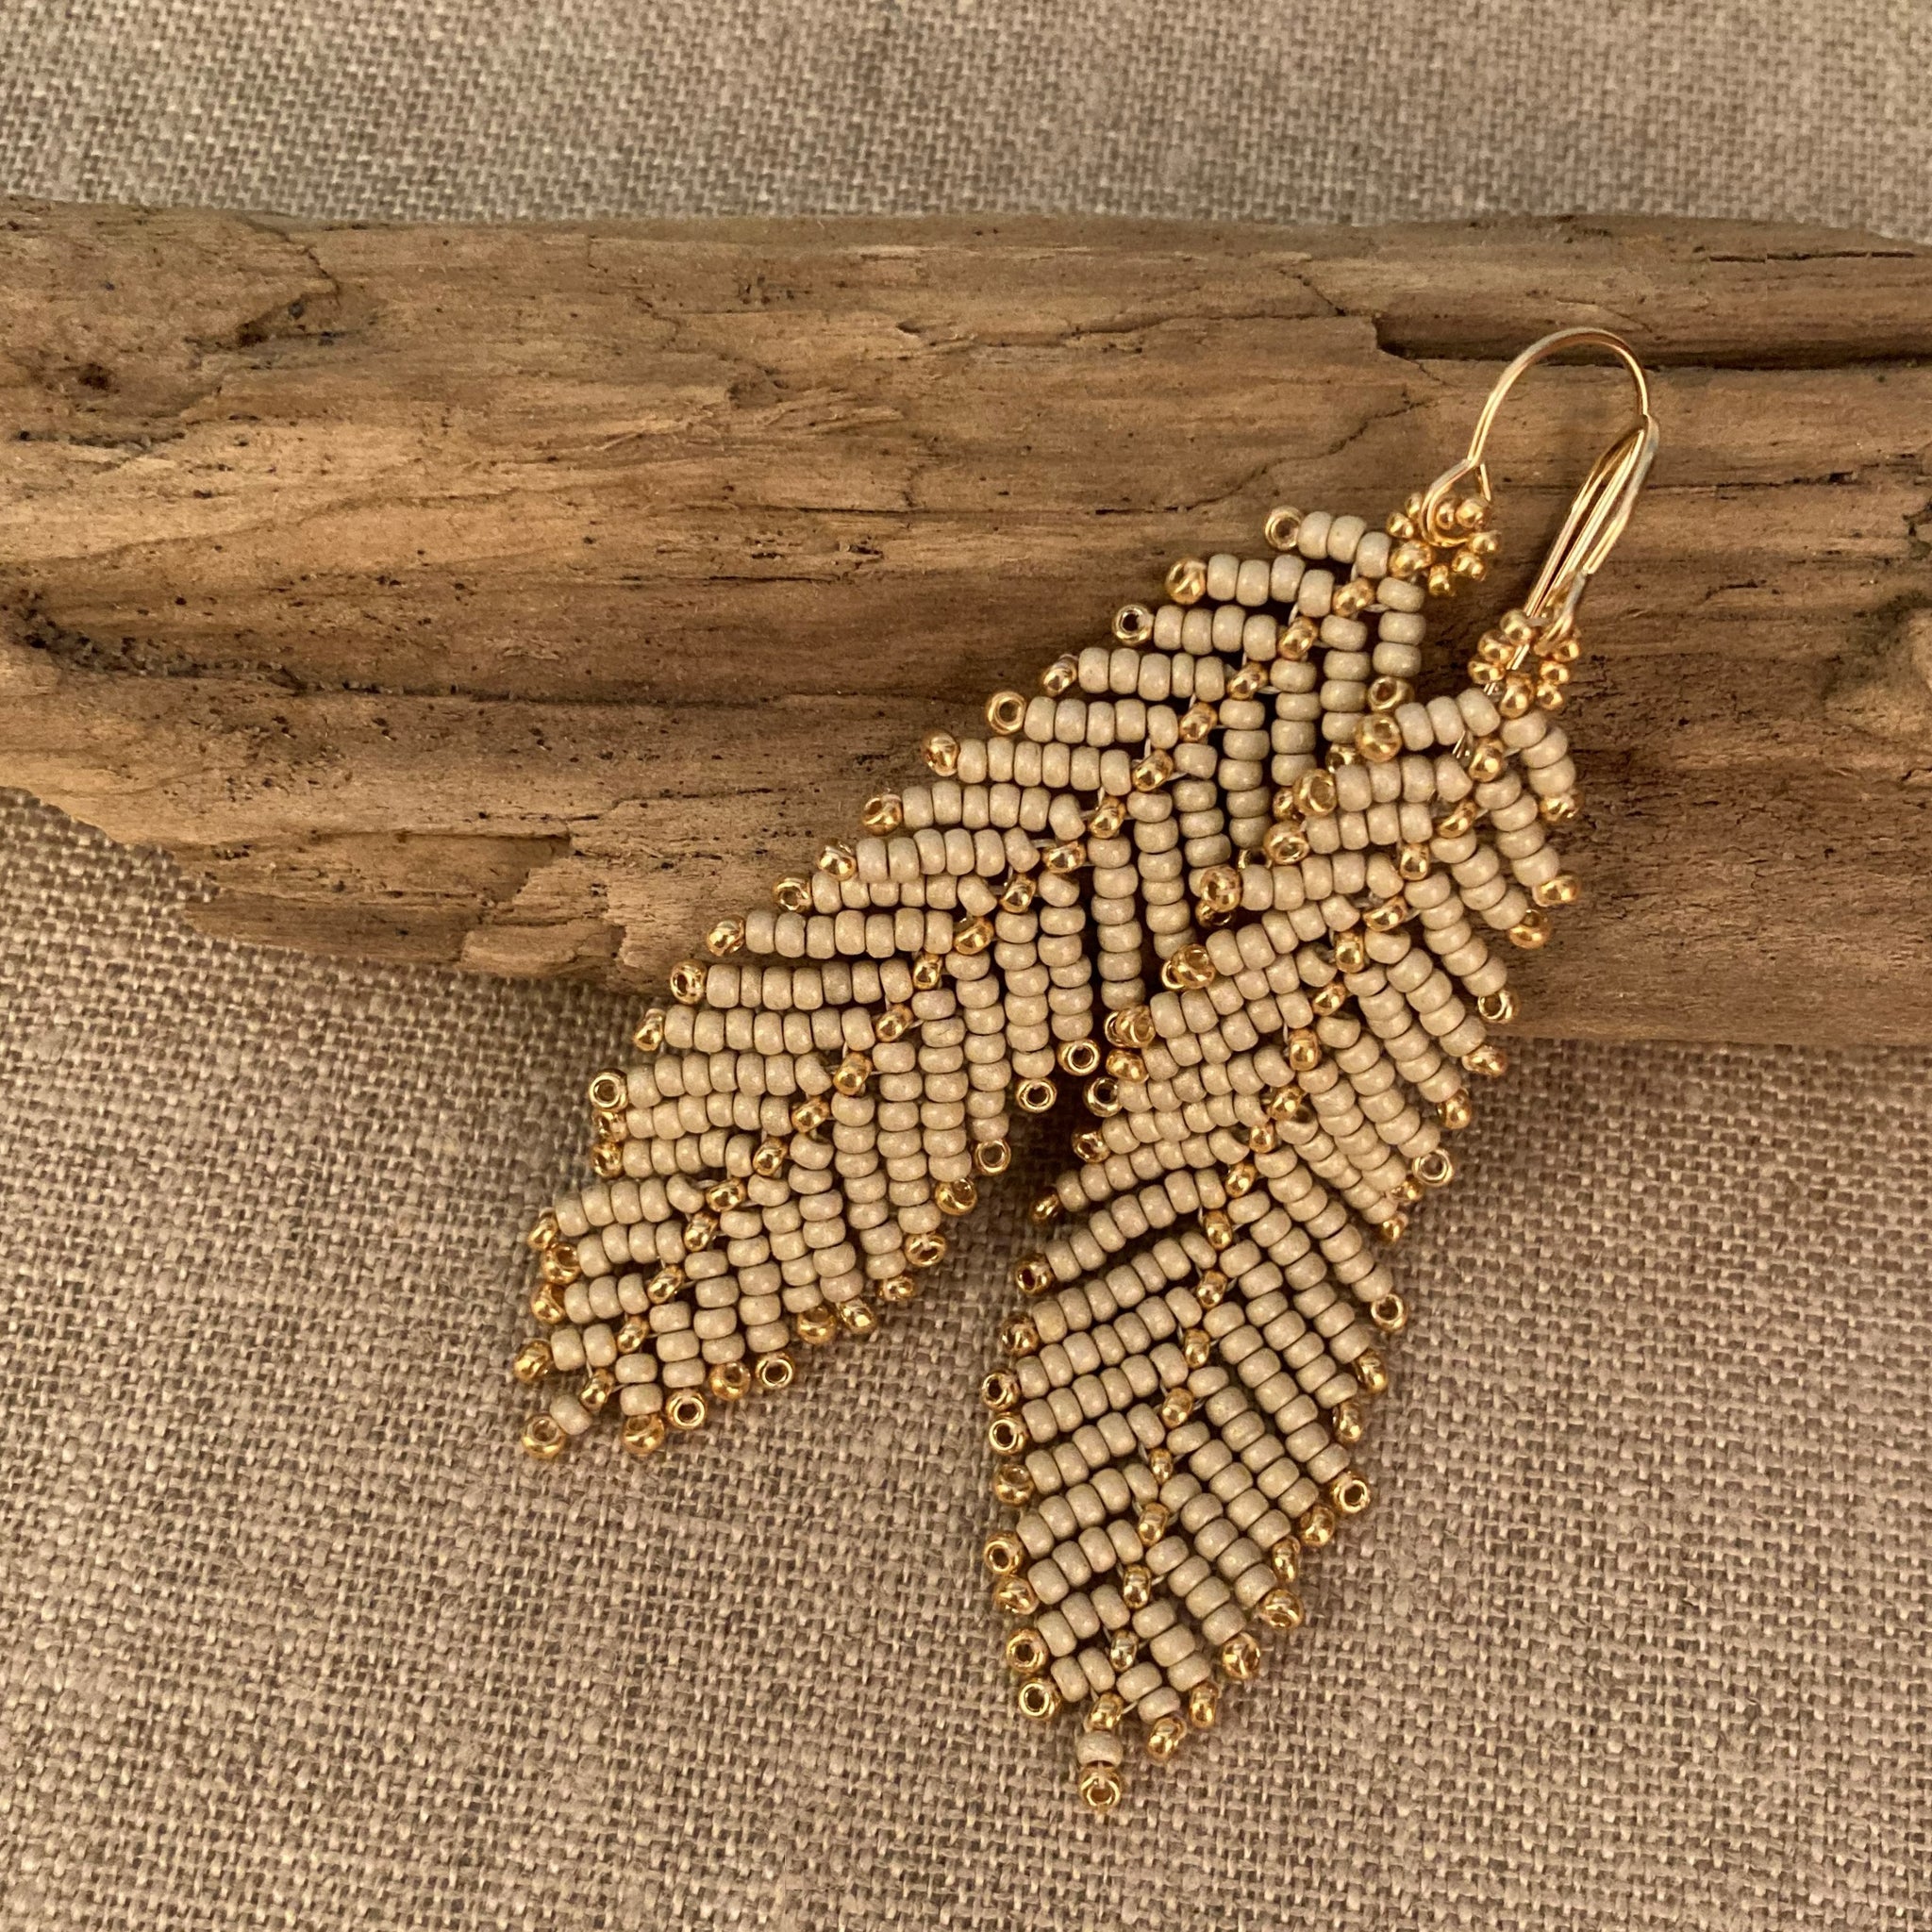 Feather Leaf Seed Bead Earrings Beige Taupe Gold 14K gold filled resort beach Summer lightweight Beaded By The Beach handmade USA